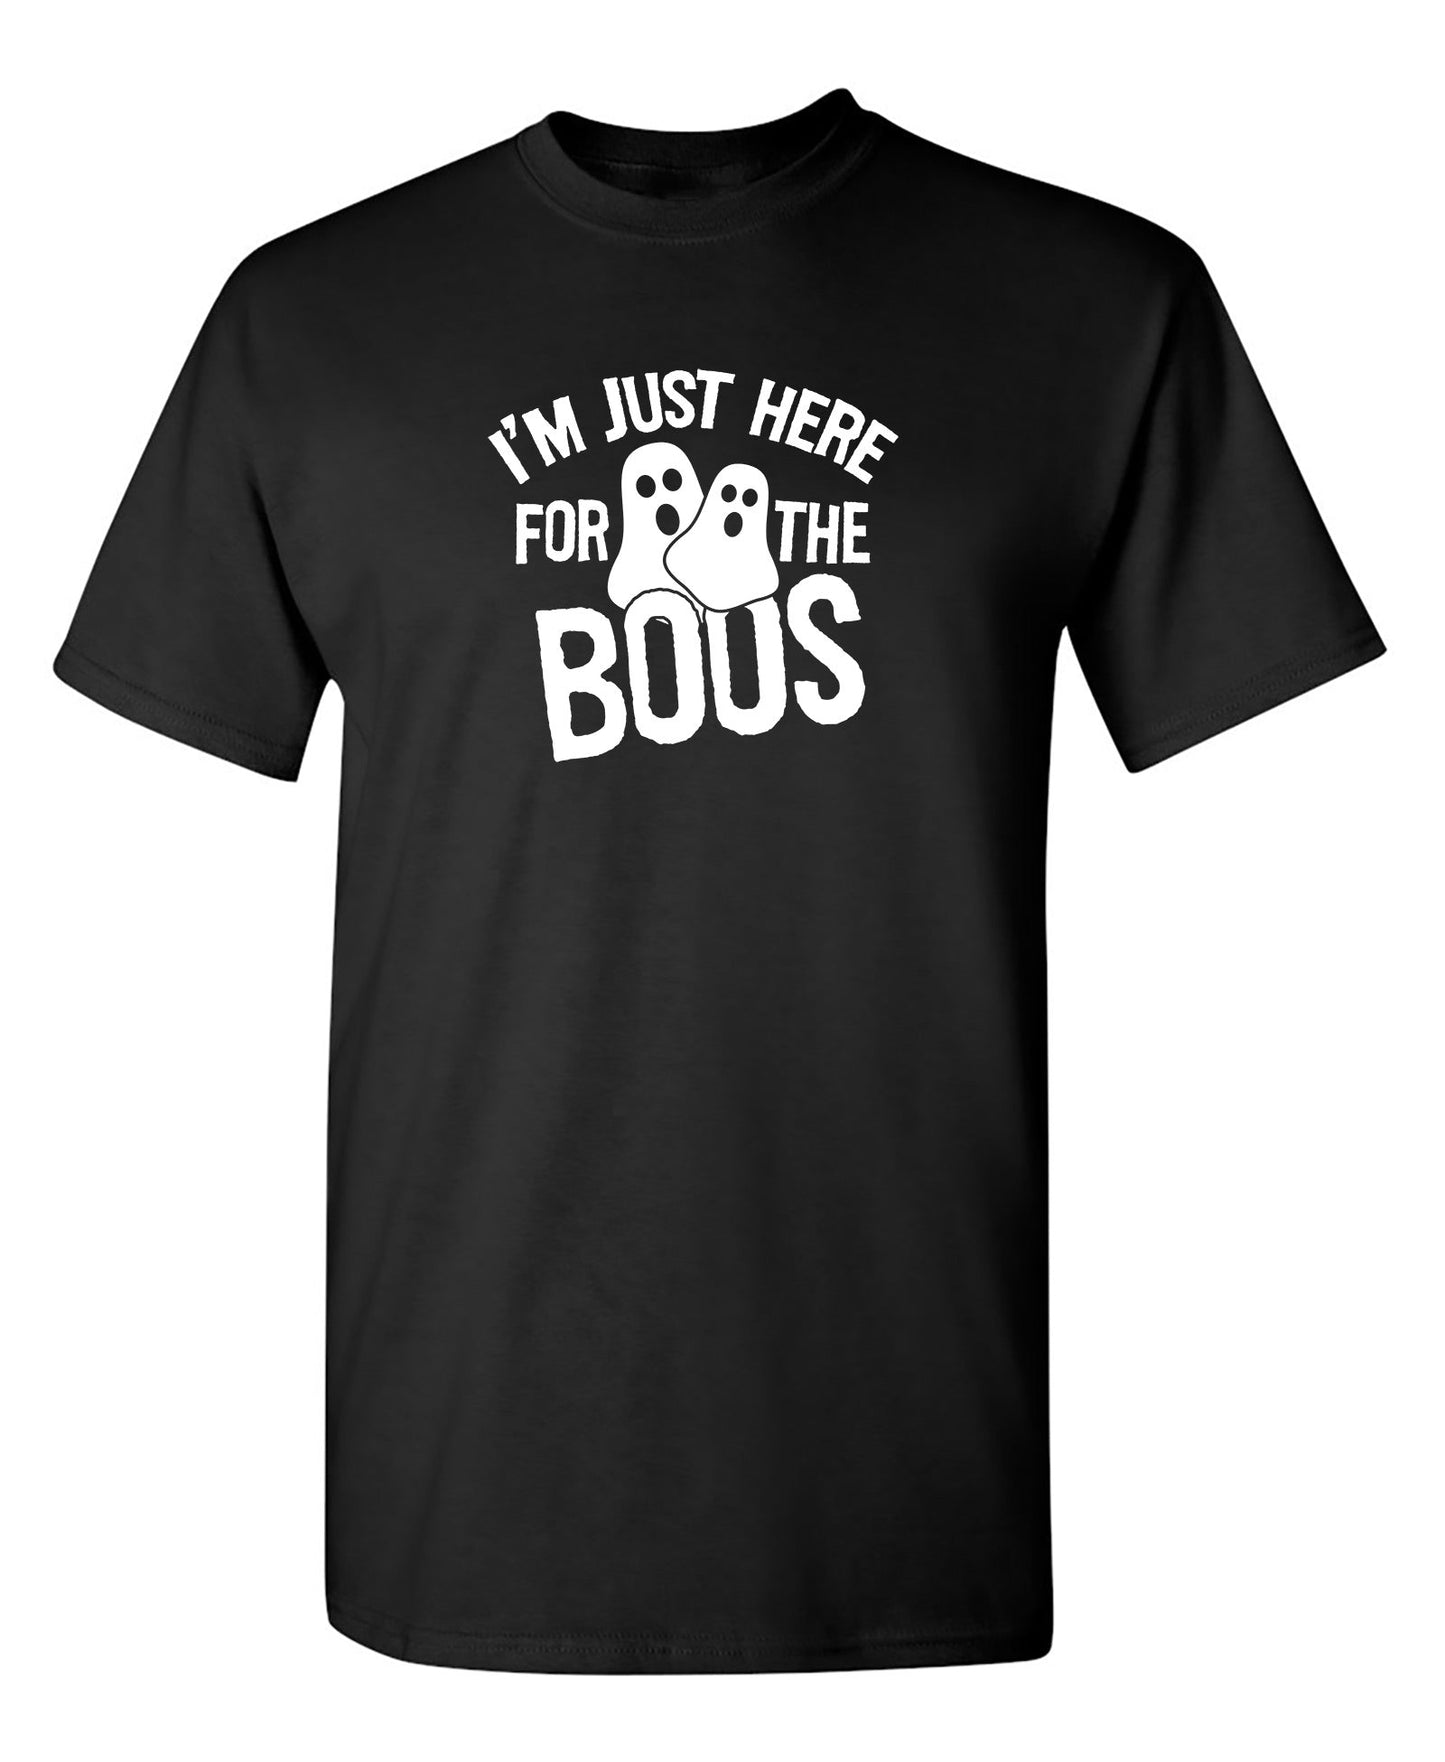 I'm Just Here For The Boos - Funny T Shirts & Graphic Tees